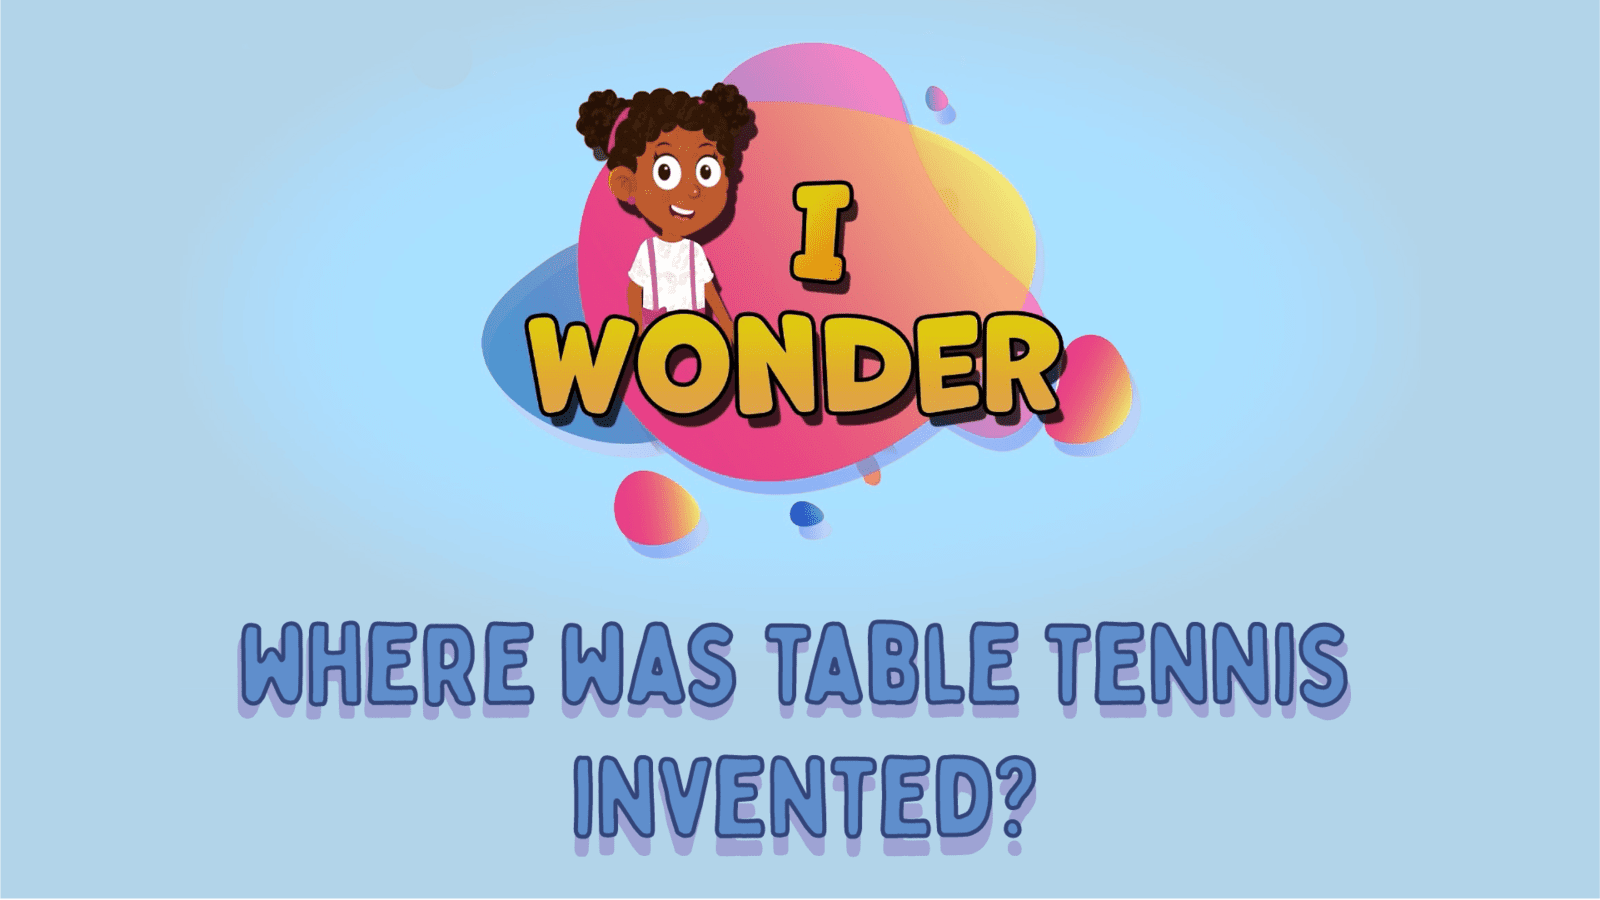 Where Was Table Tennis Invented?